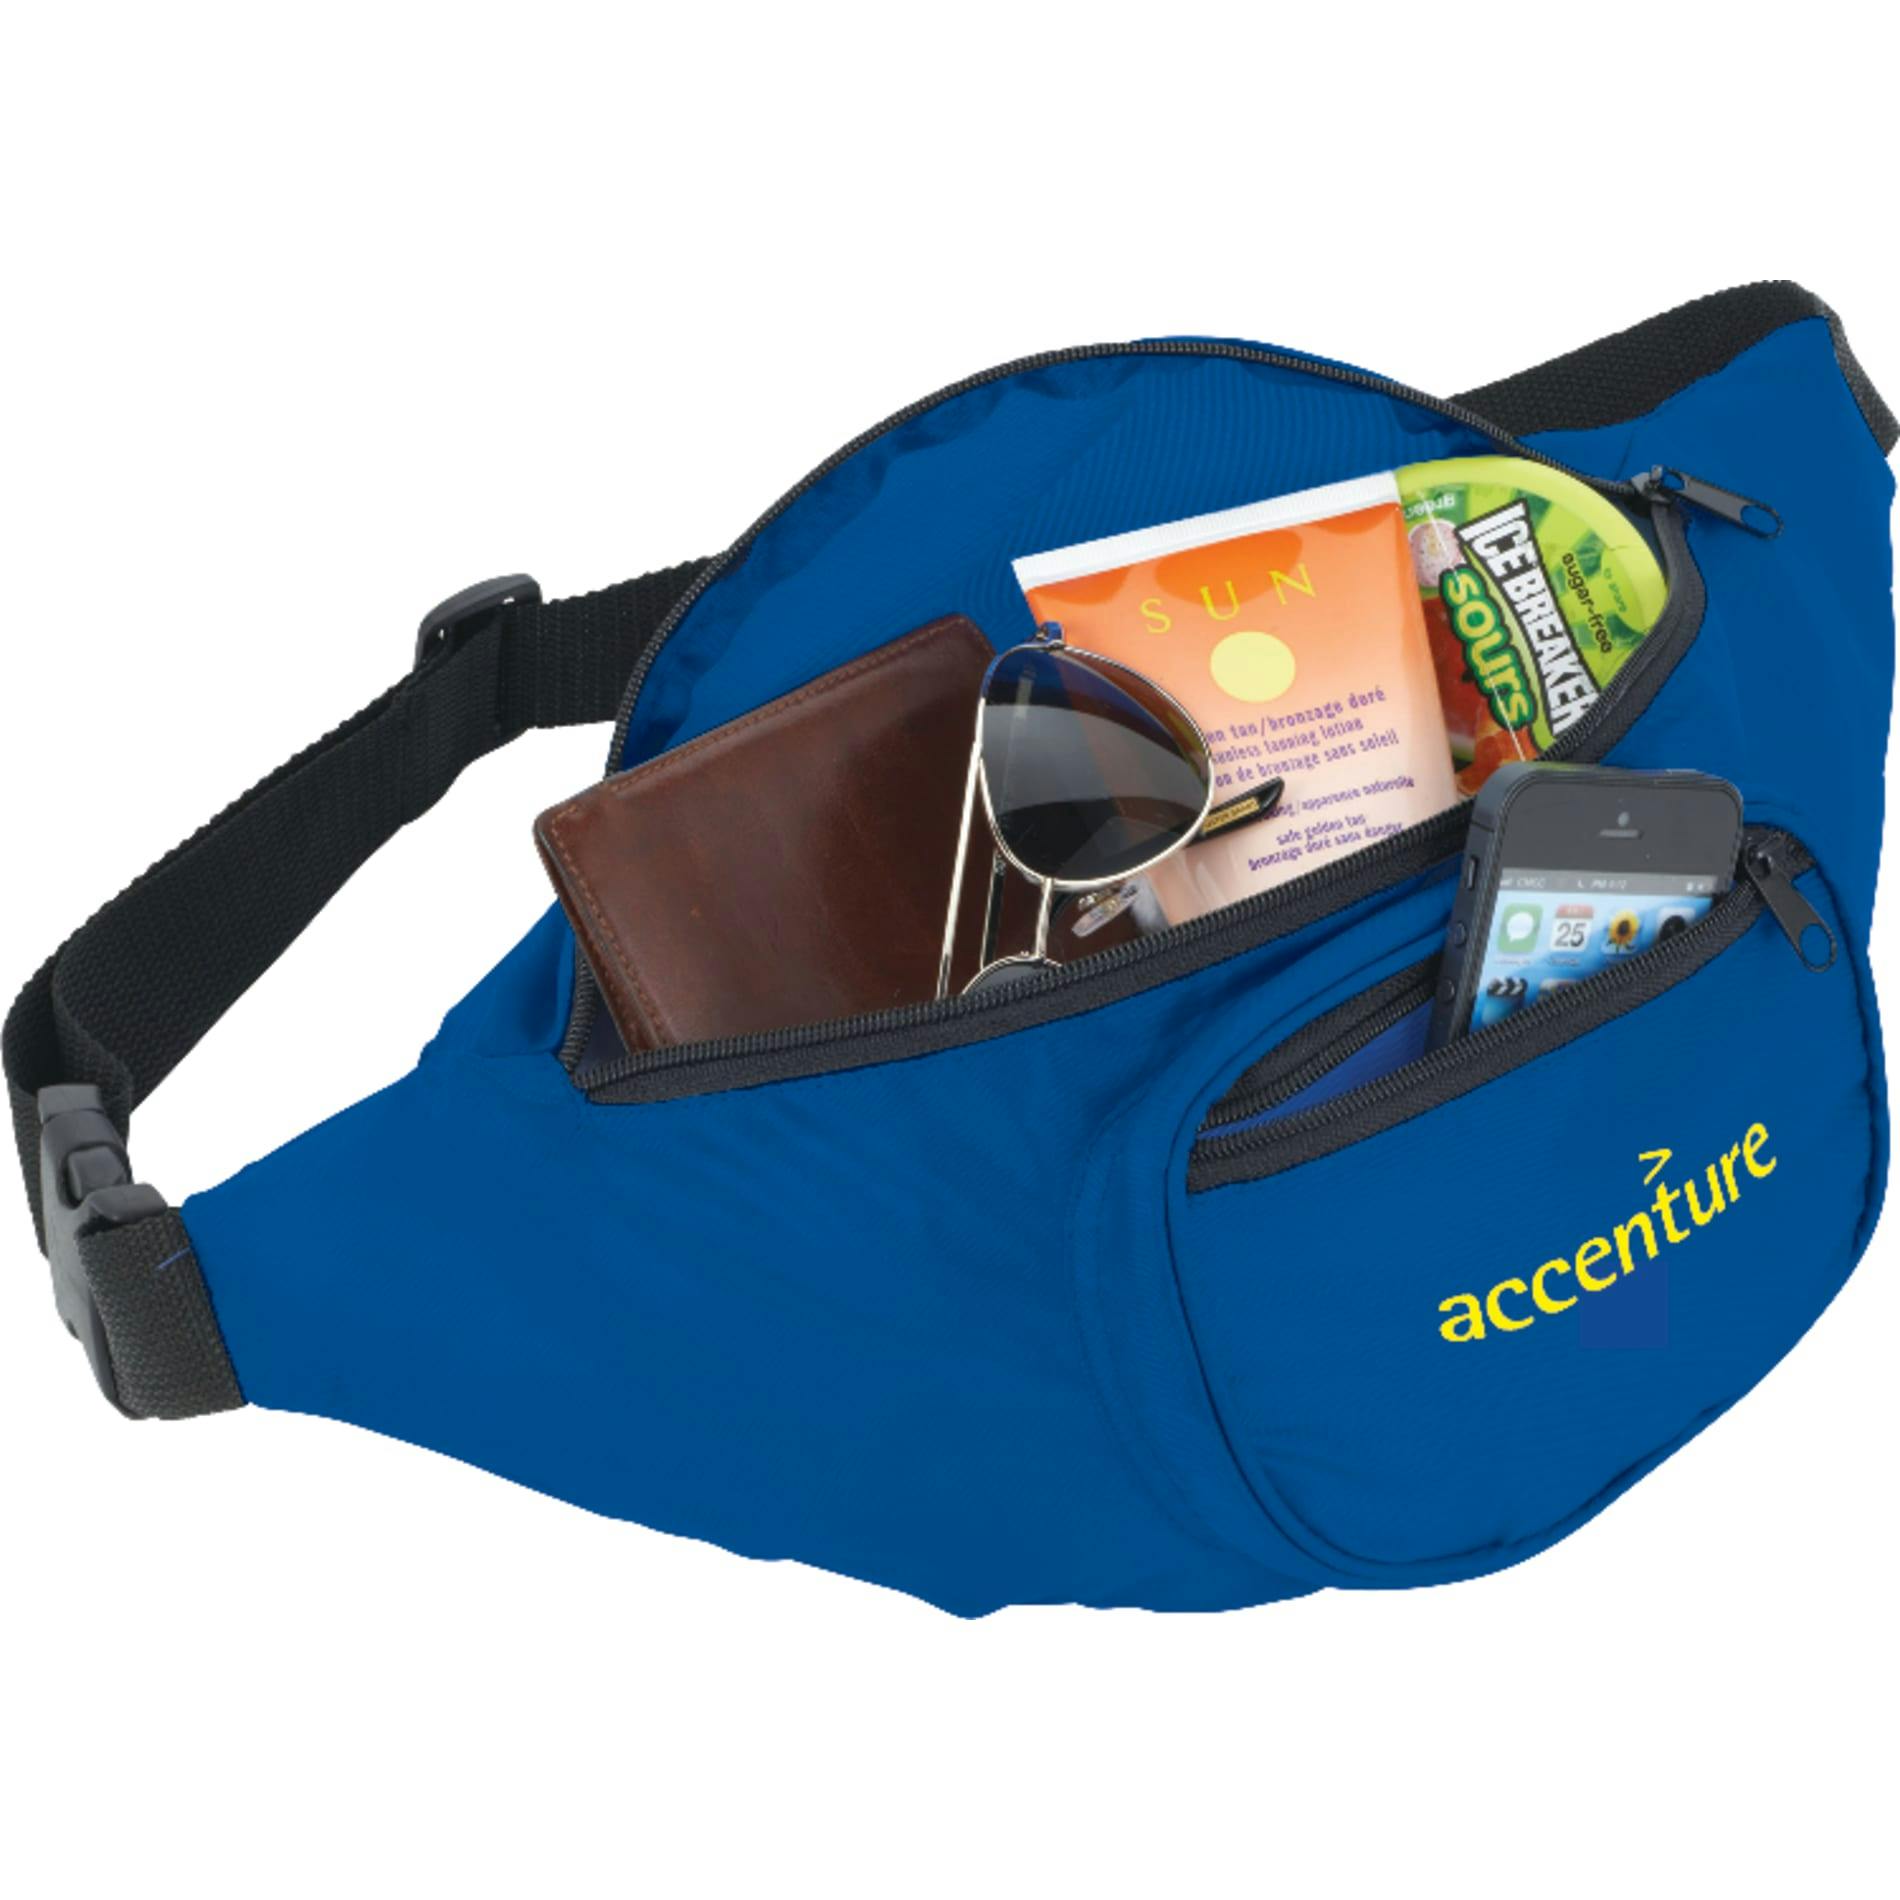 Hipster Deluxe Fanny Pack - additional Image 1